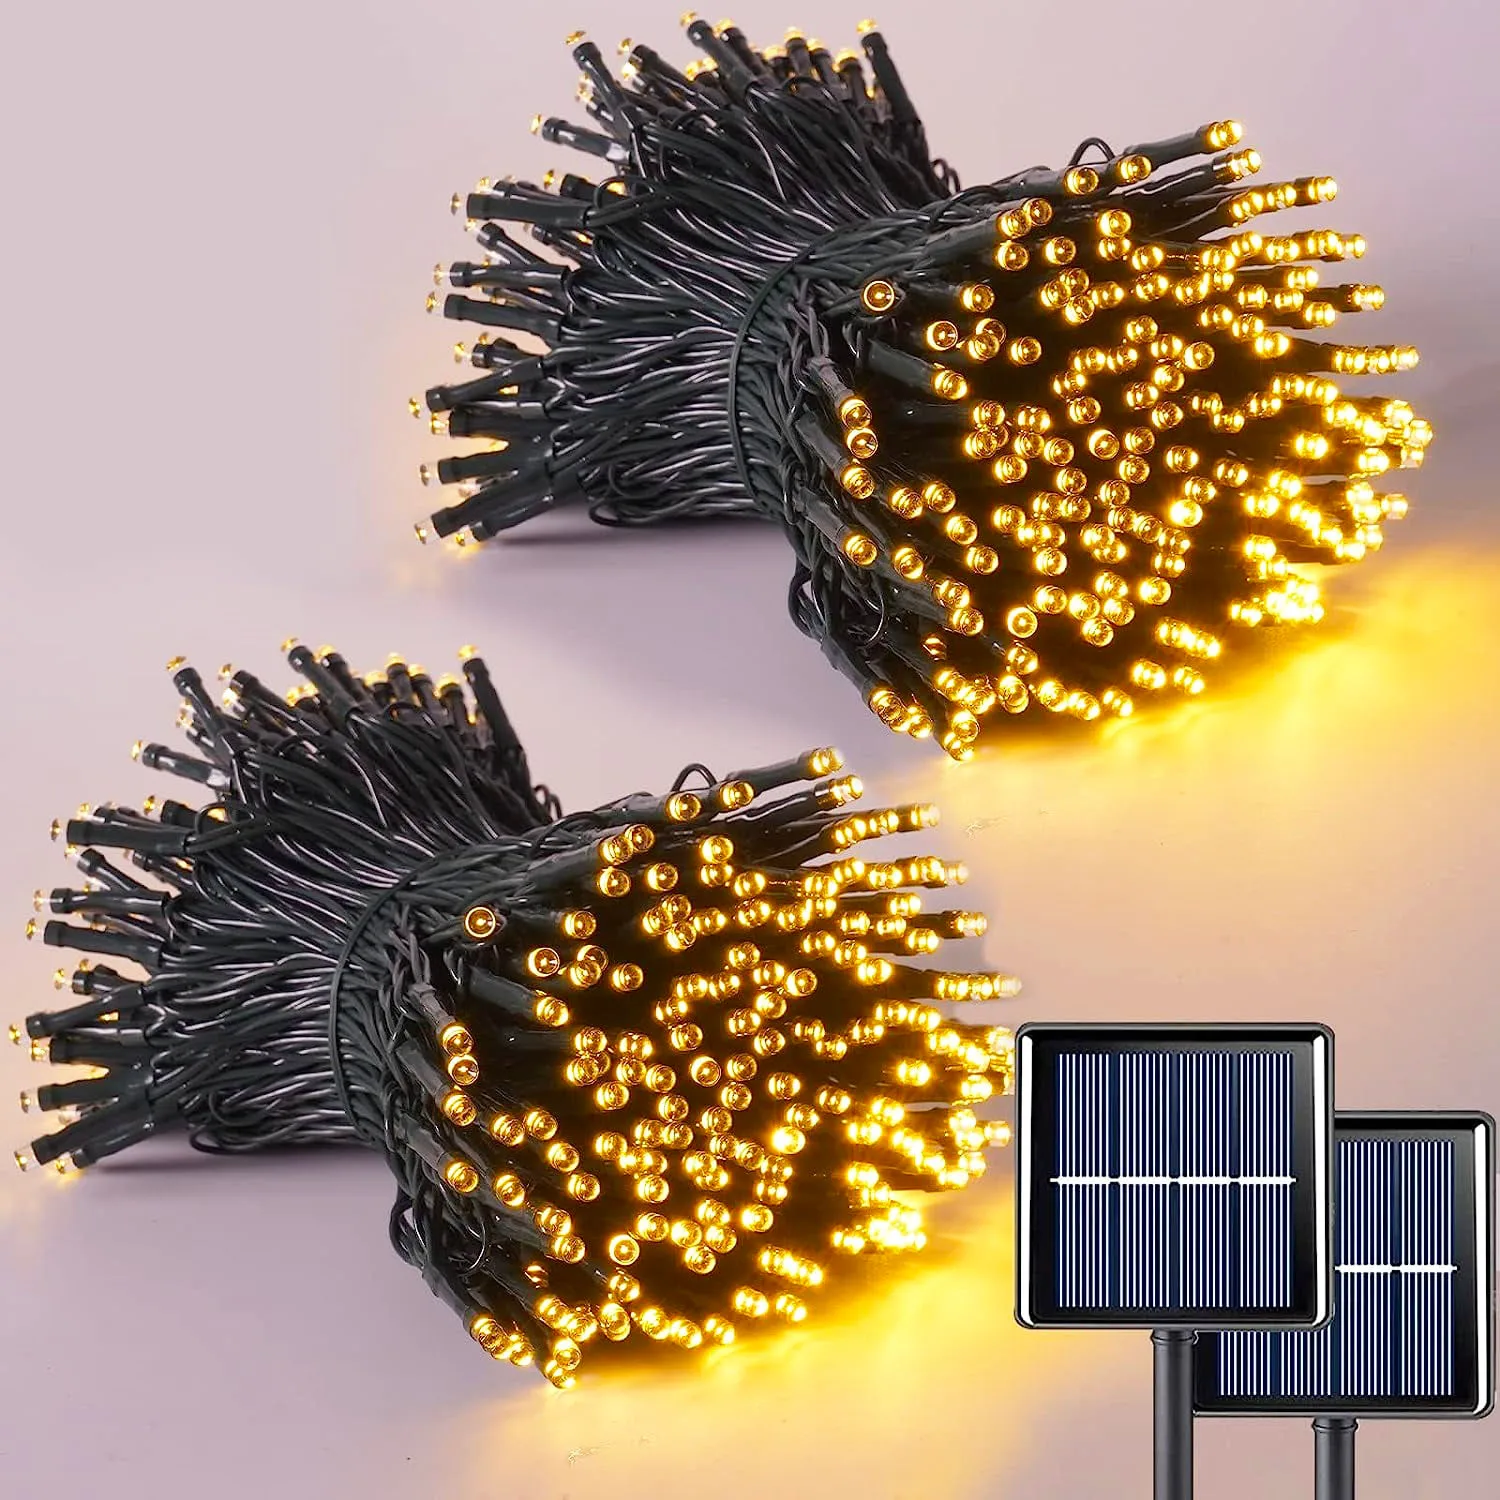 2Pack Solar String Lights Outdoor Waterproof Fairy Christmas Twinkle Lights with 8 Modes Tree Lights for Outdoor Garden Patio solar led lighted patio umbrella cantilever hanging umbrella with 8 brightness modes outdoor decors suitable for courtyard